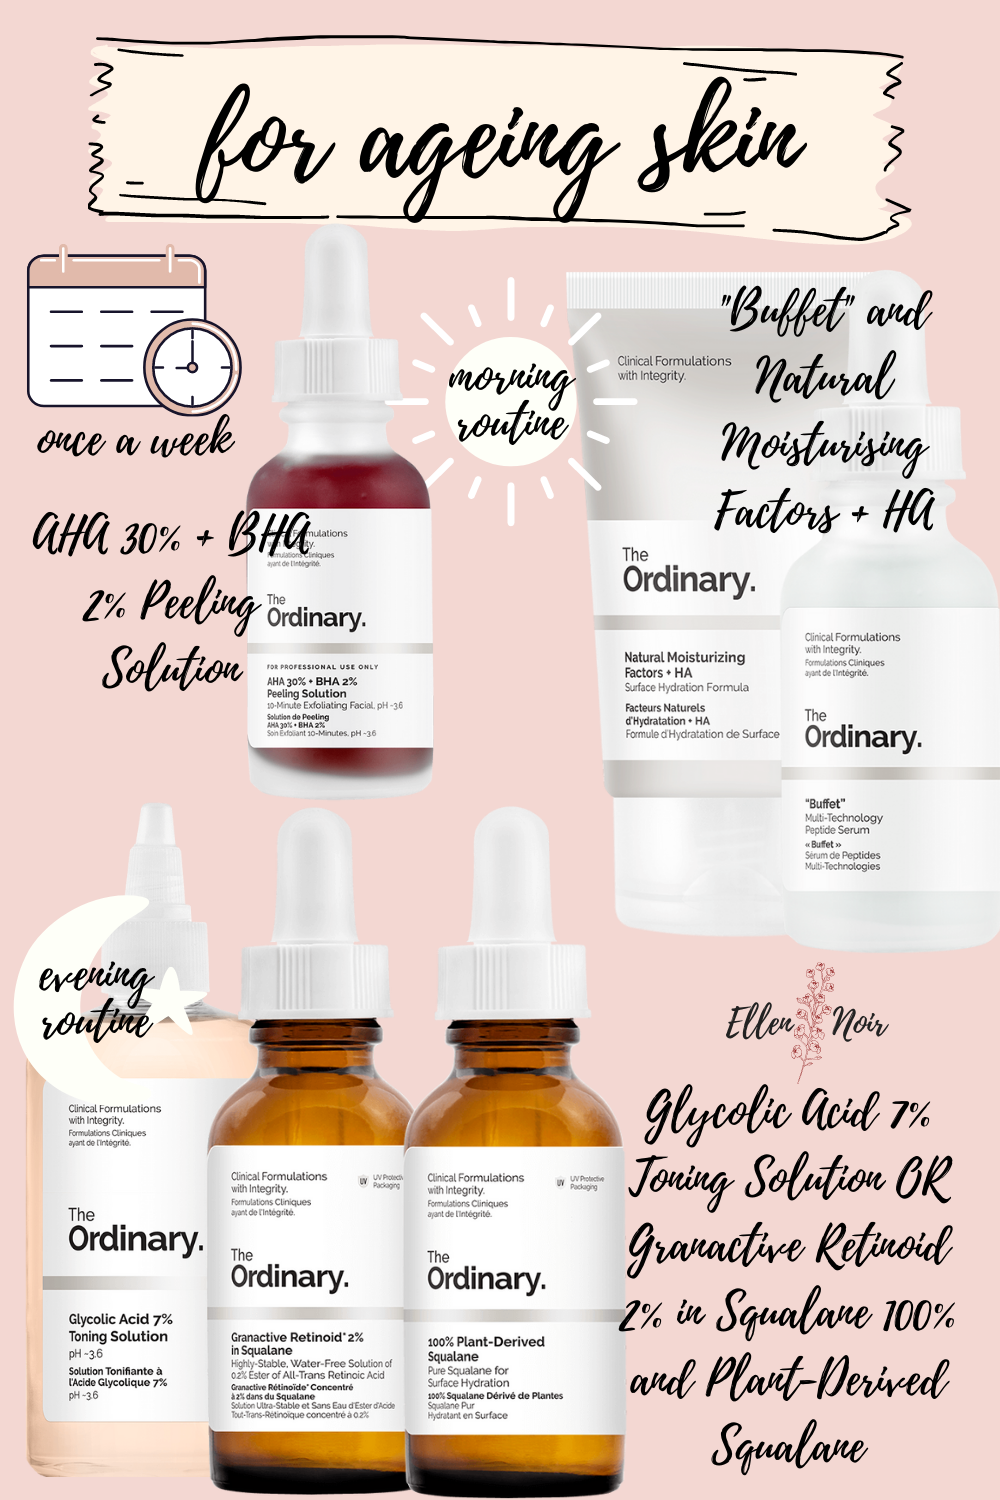 The Ordinary Products for Ageing Skin